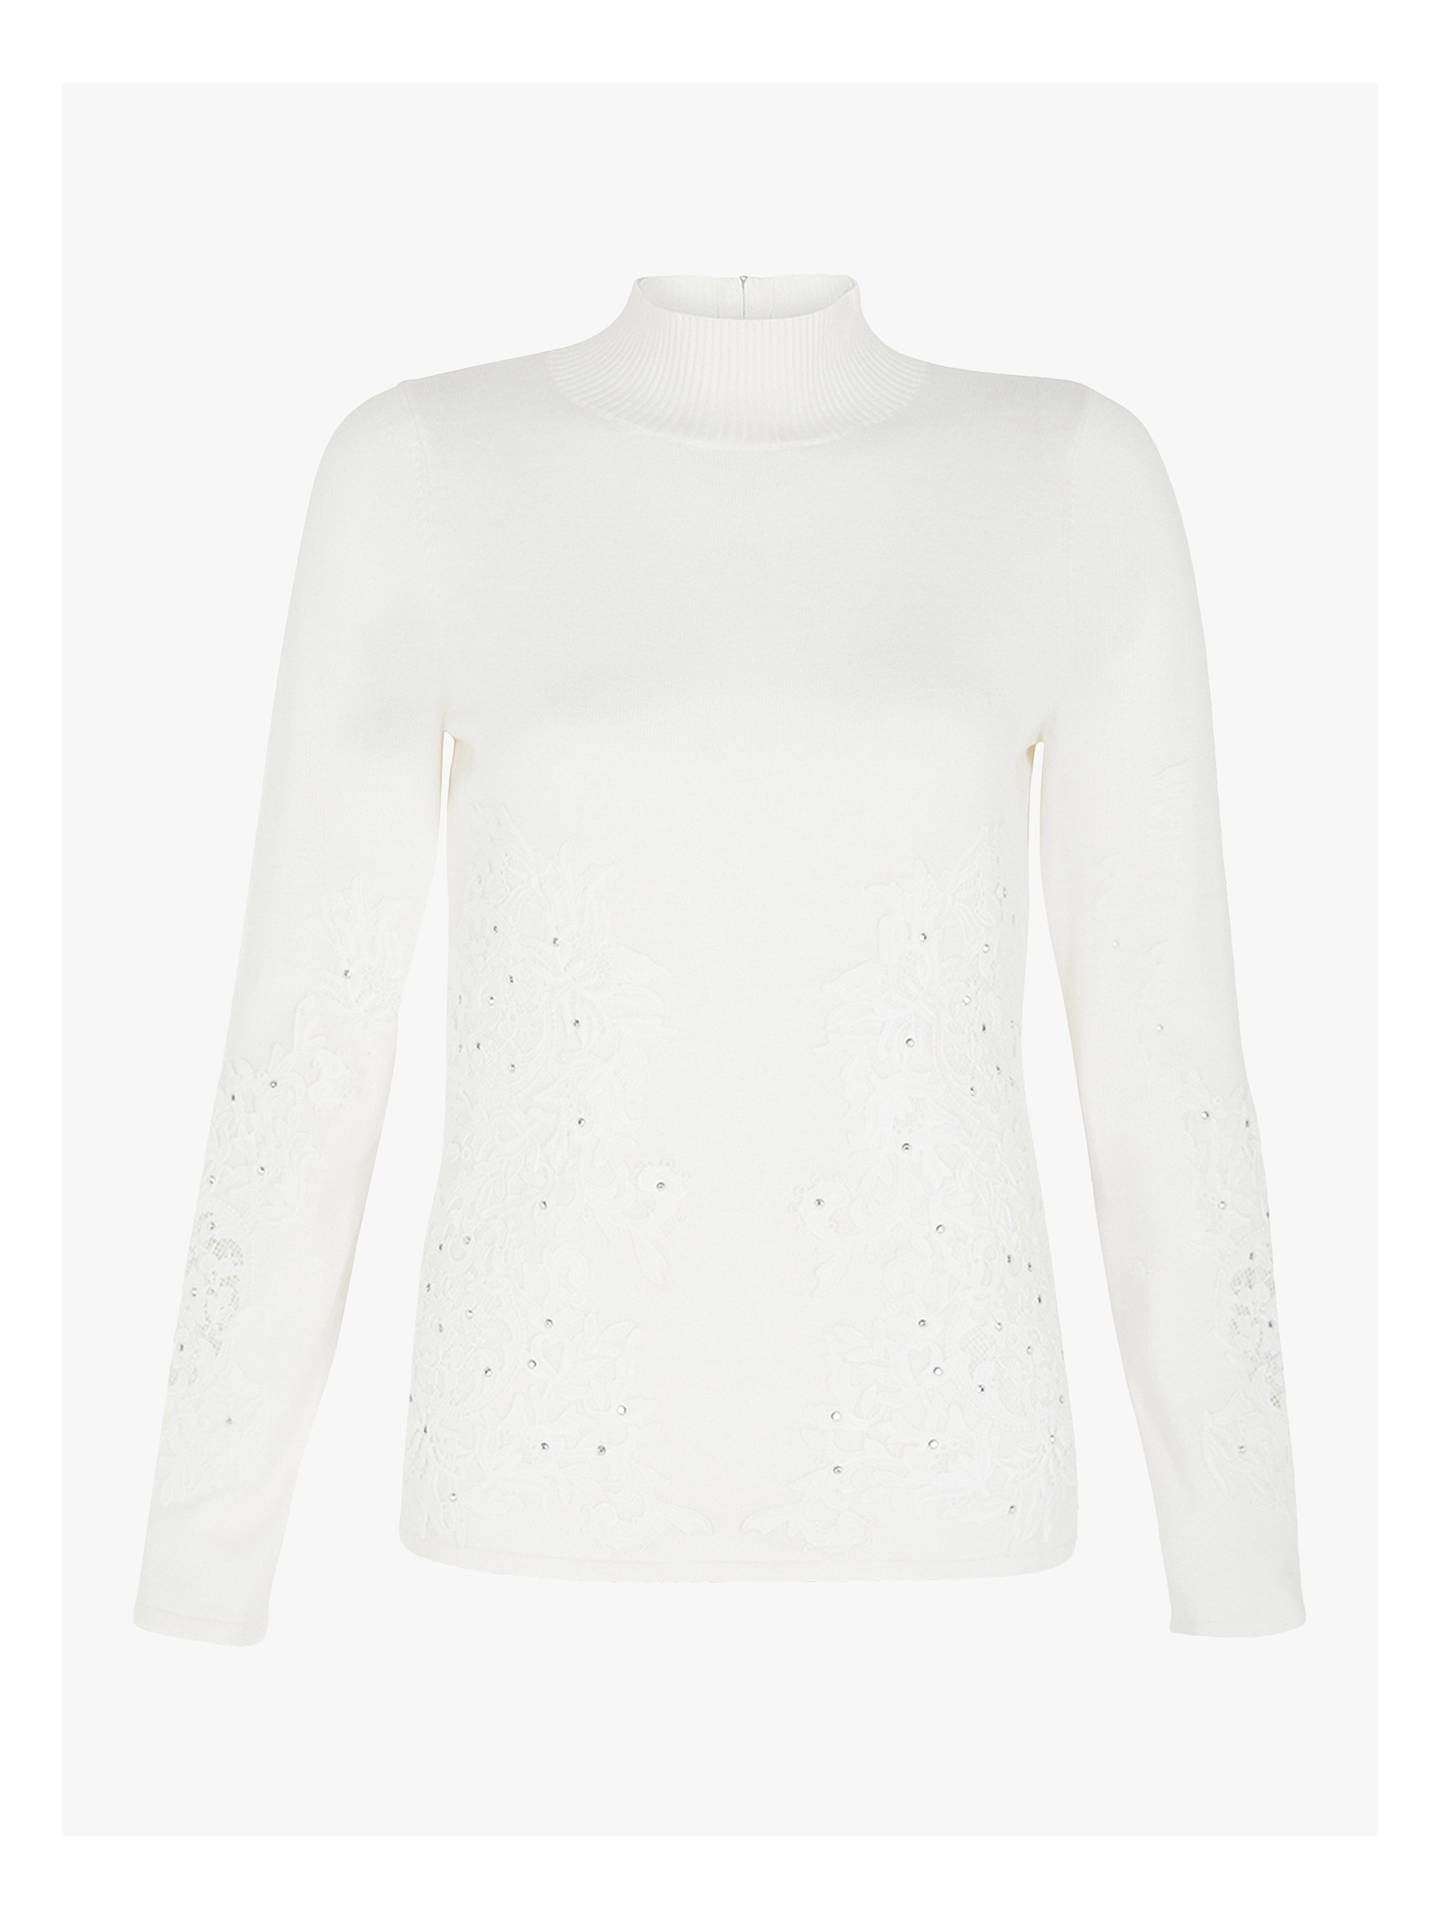 Coast Karla Lace Embellished Knitted Top, White at John Lewis & Partners